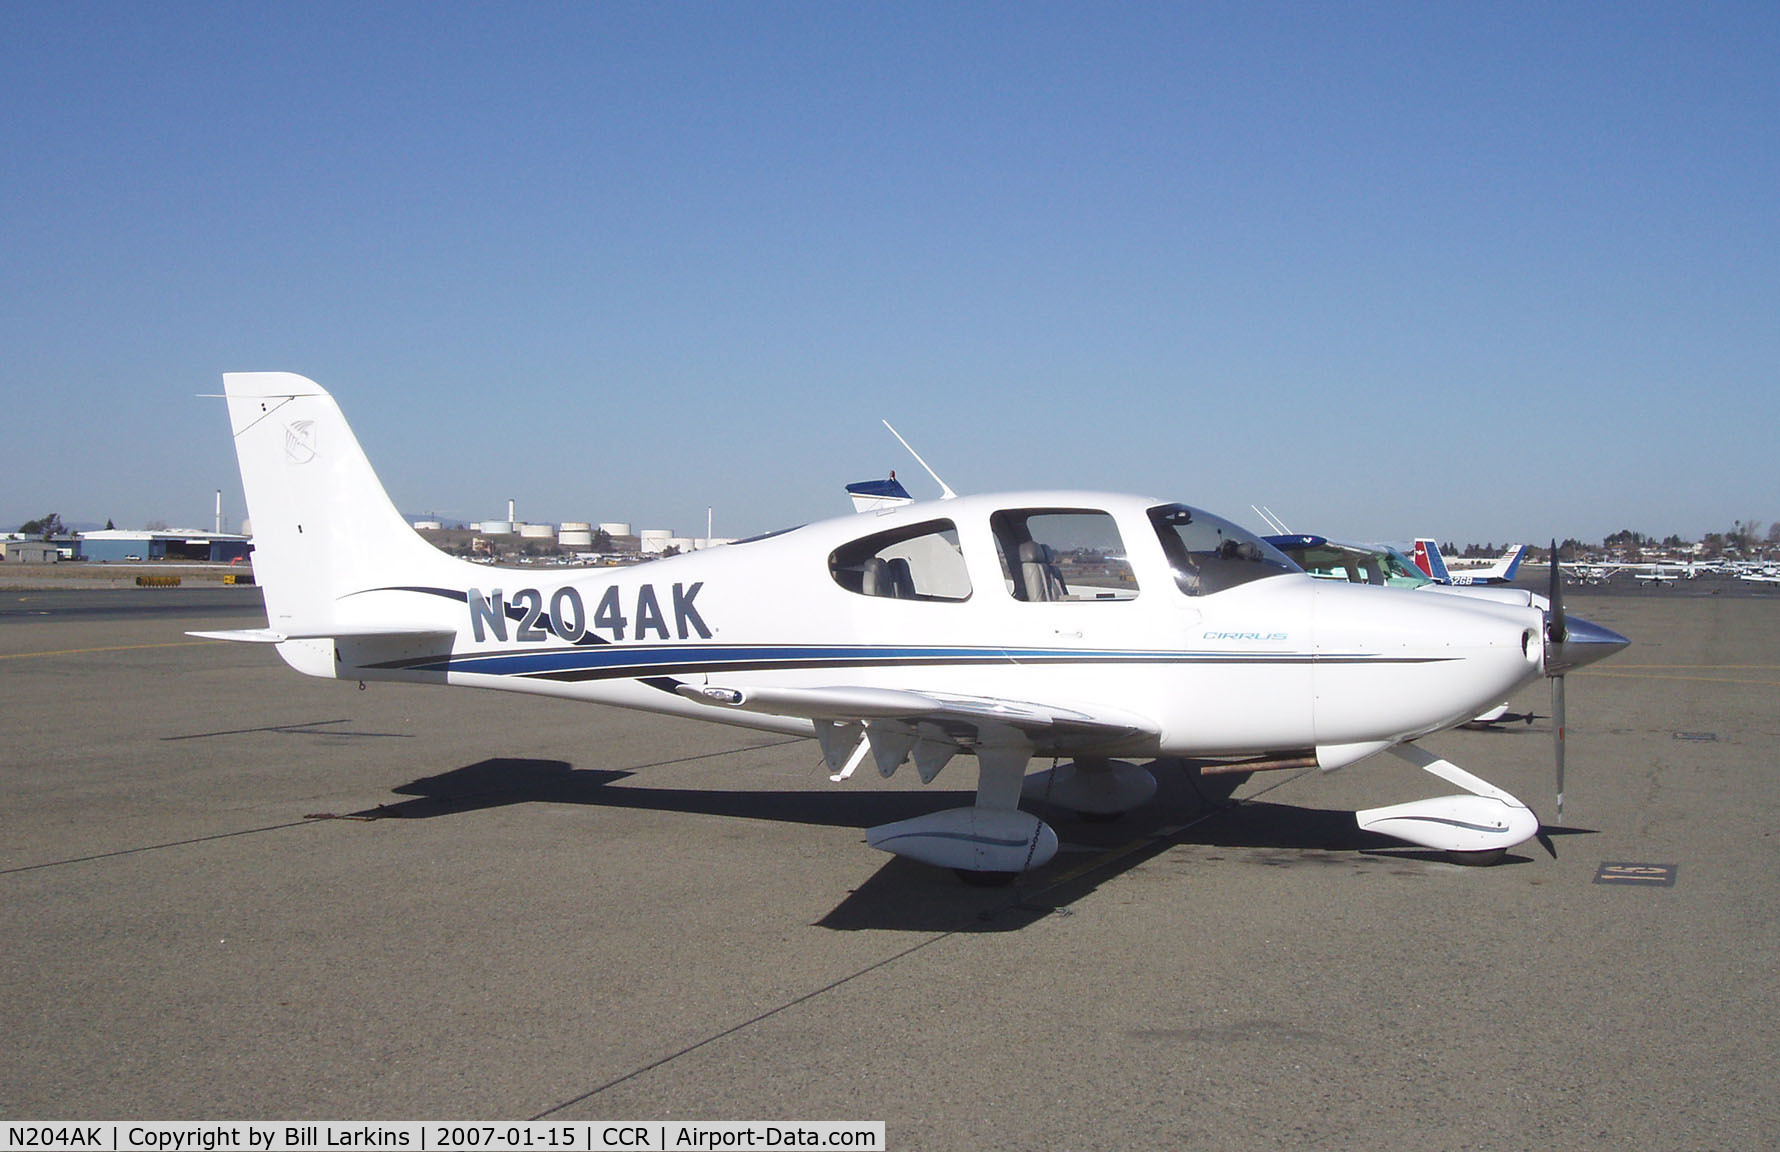 N204AK, 2001 Cirrus SR20 C/N 1120, Visitor from Calistoga on a bright winter day.